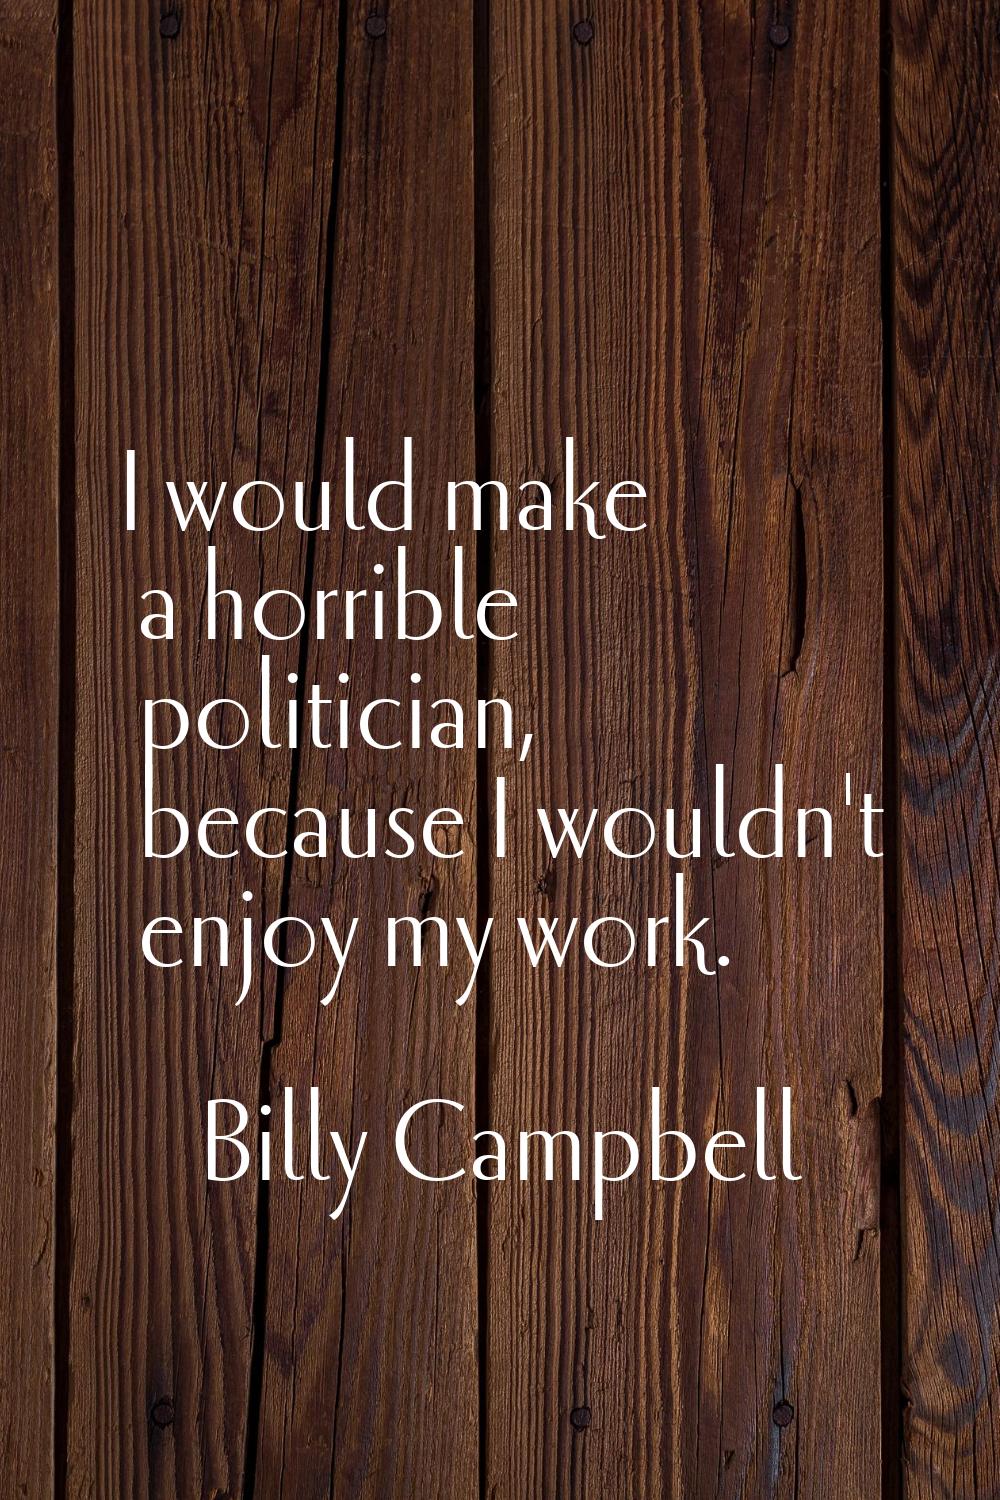 I would make a horrible politician, because I wouldn't enjoy my work.